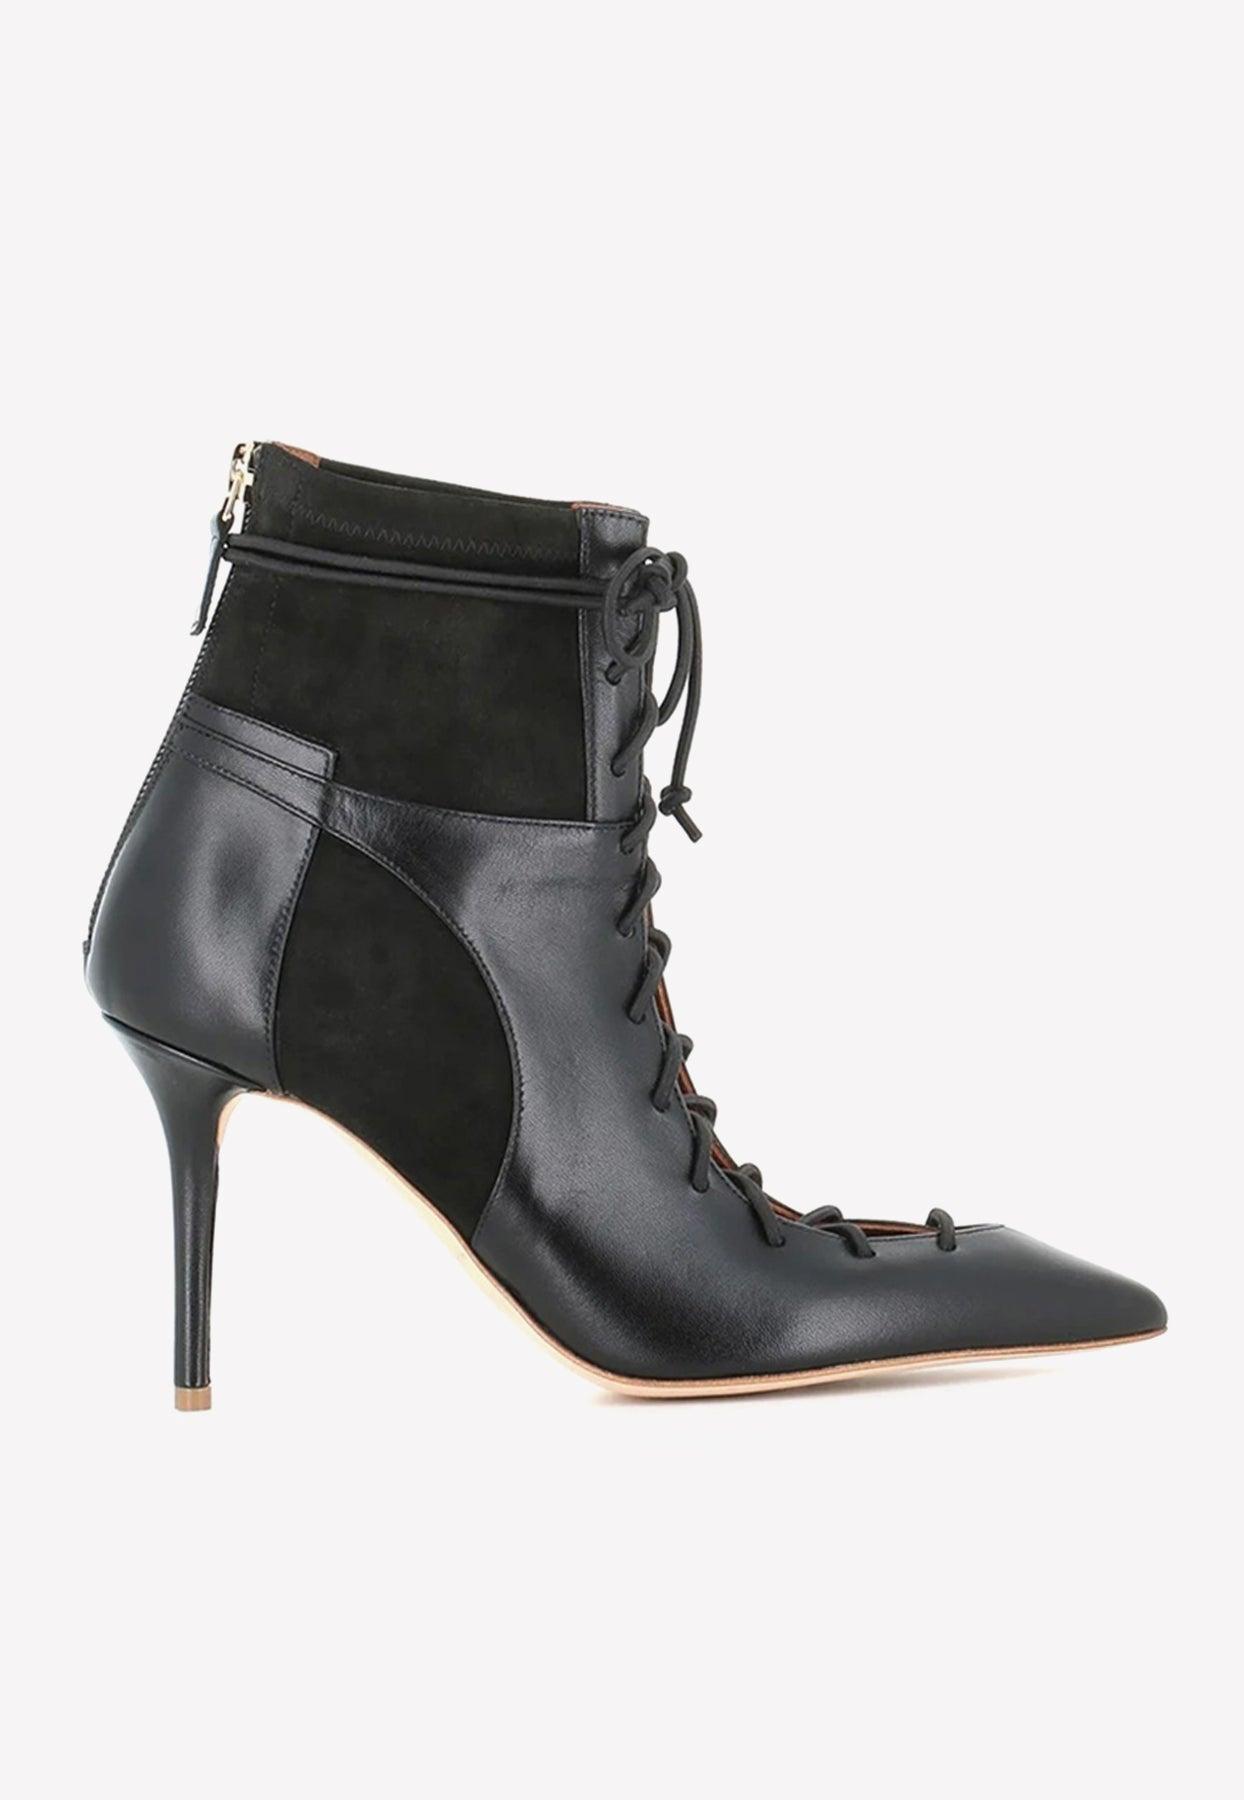 Malone Souliers Montana 85 Ankle Boots In Leather in Black | Lyst